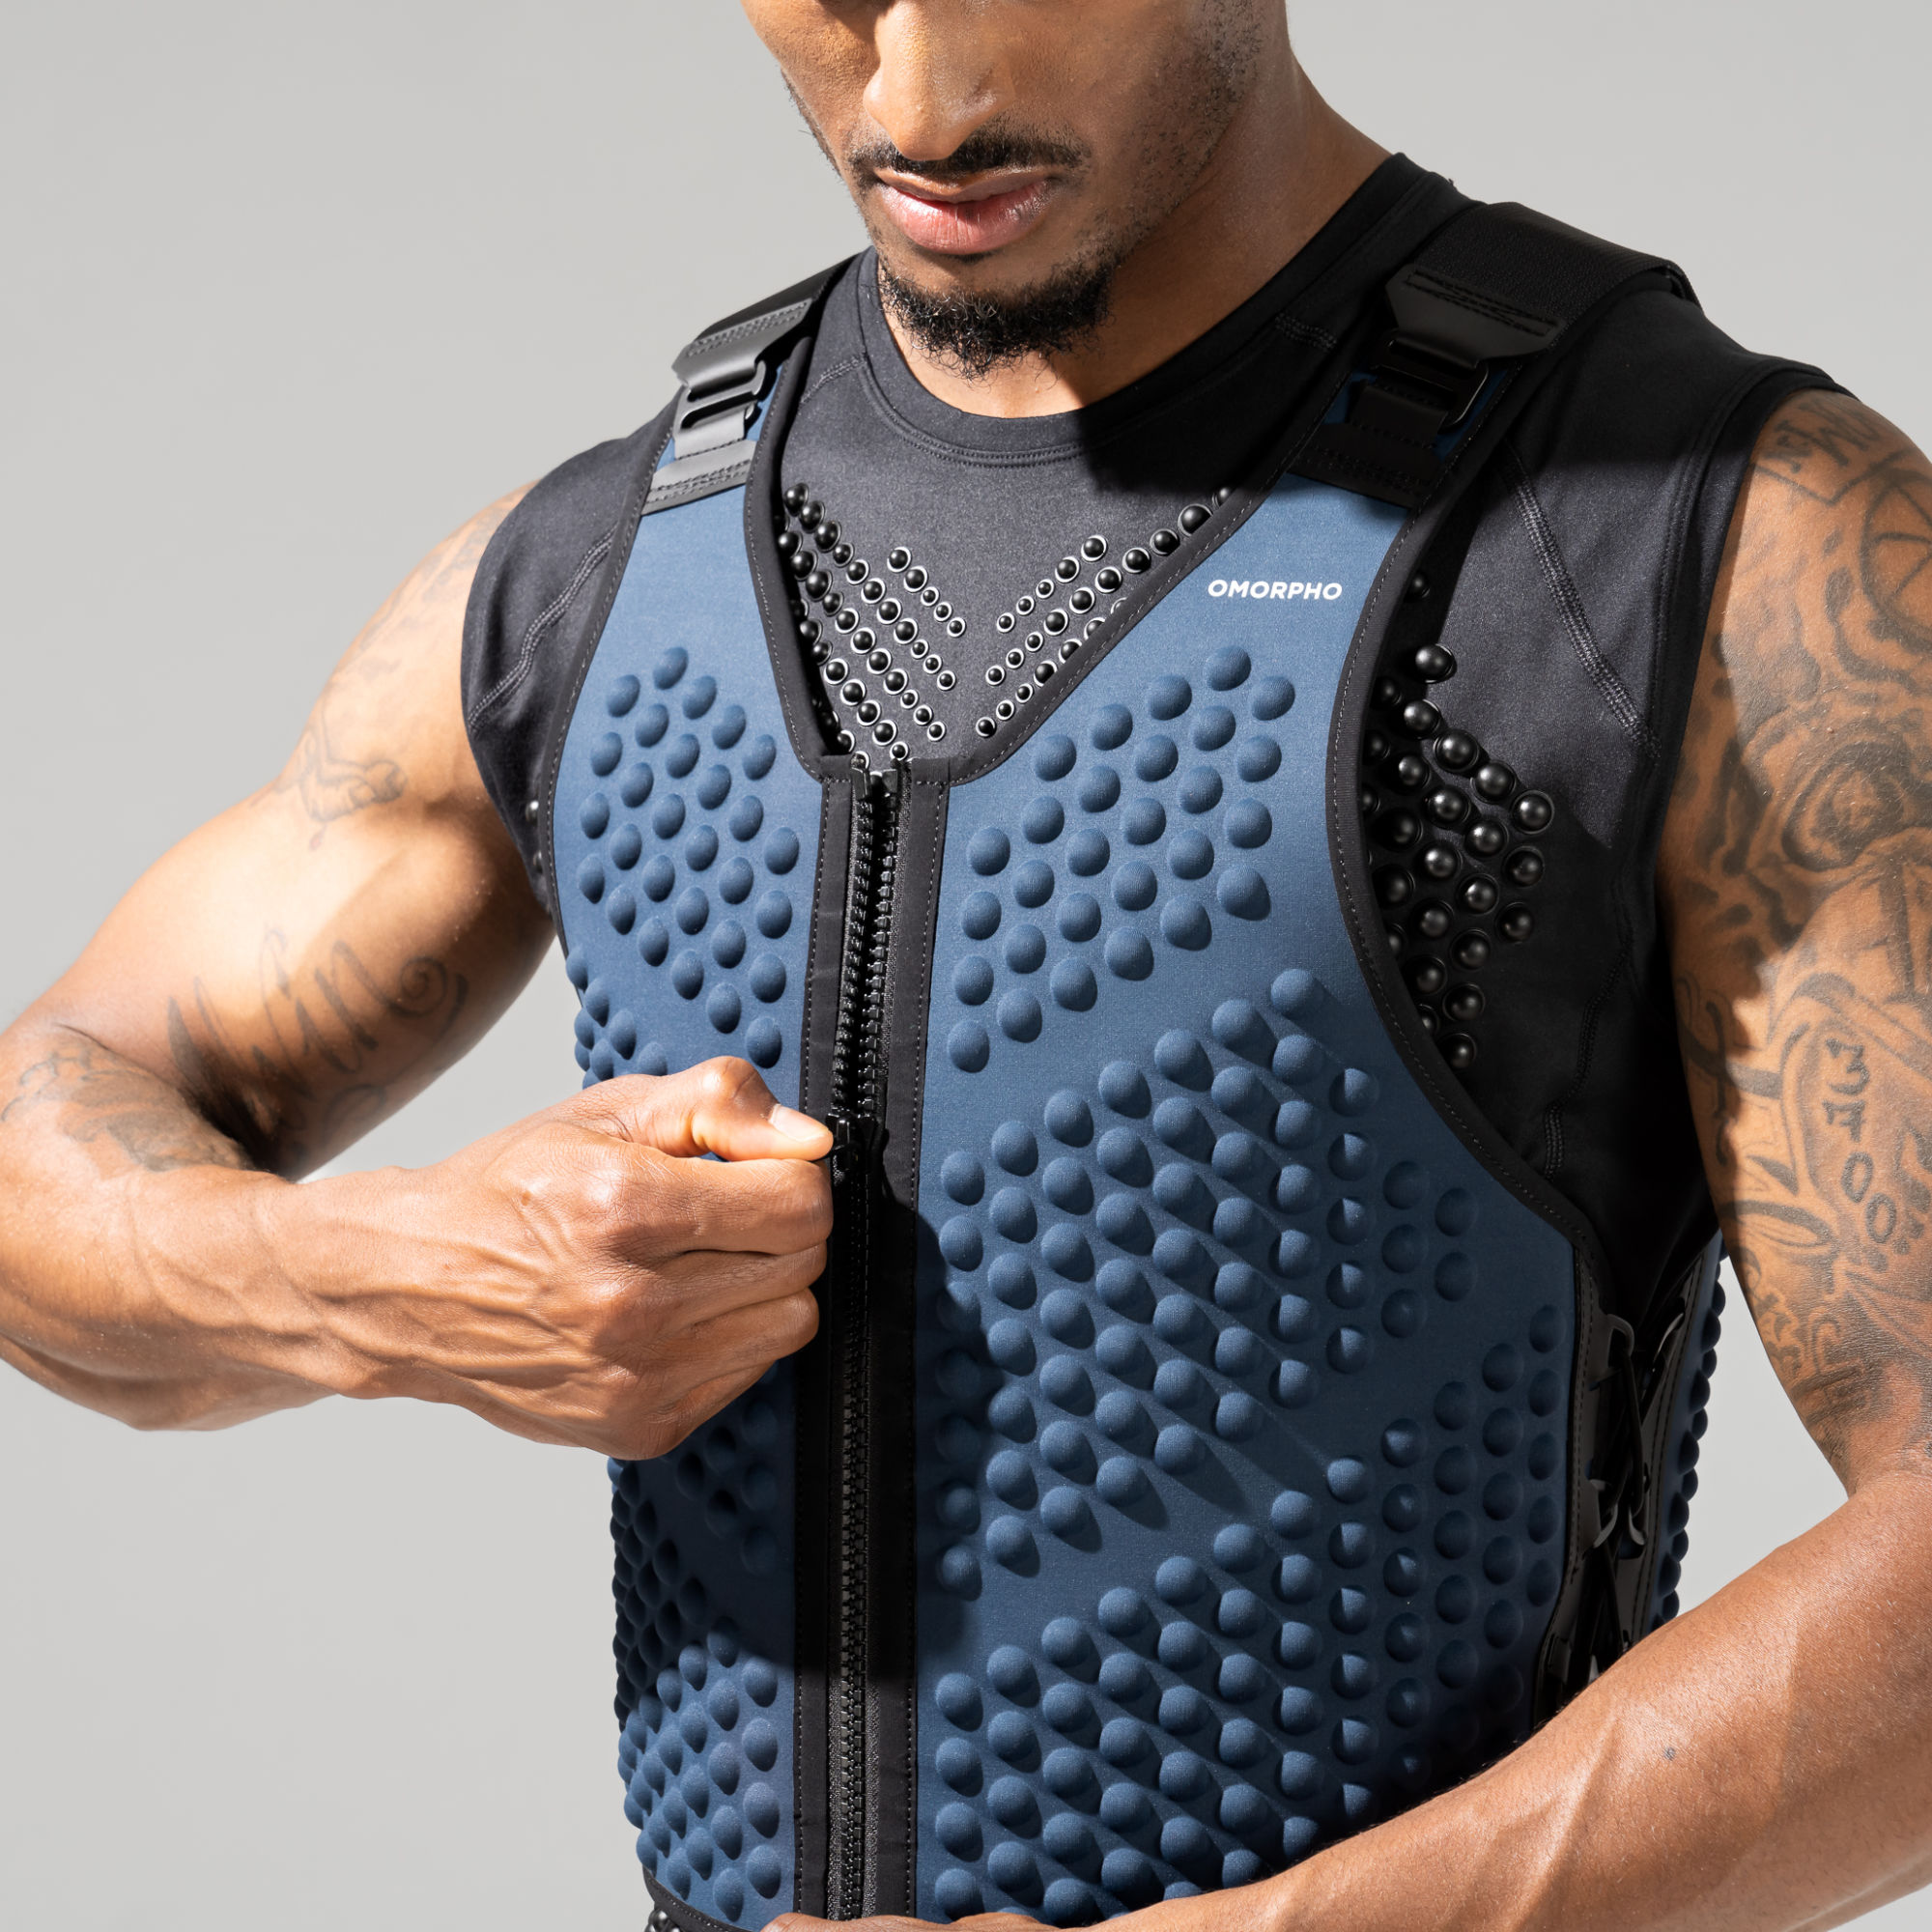 Close up of weighted vest zipper for OMORPHO Ocean G-Vest weighted vest for exercise.